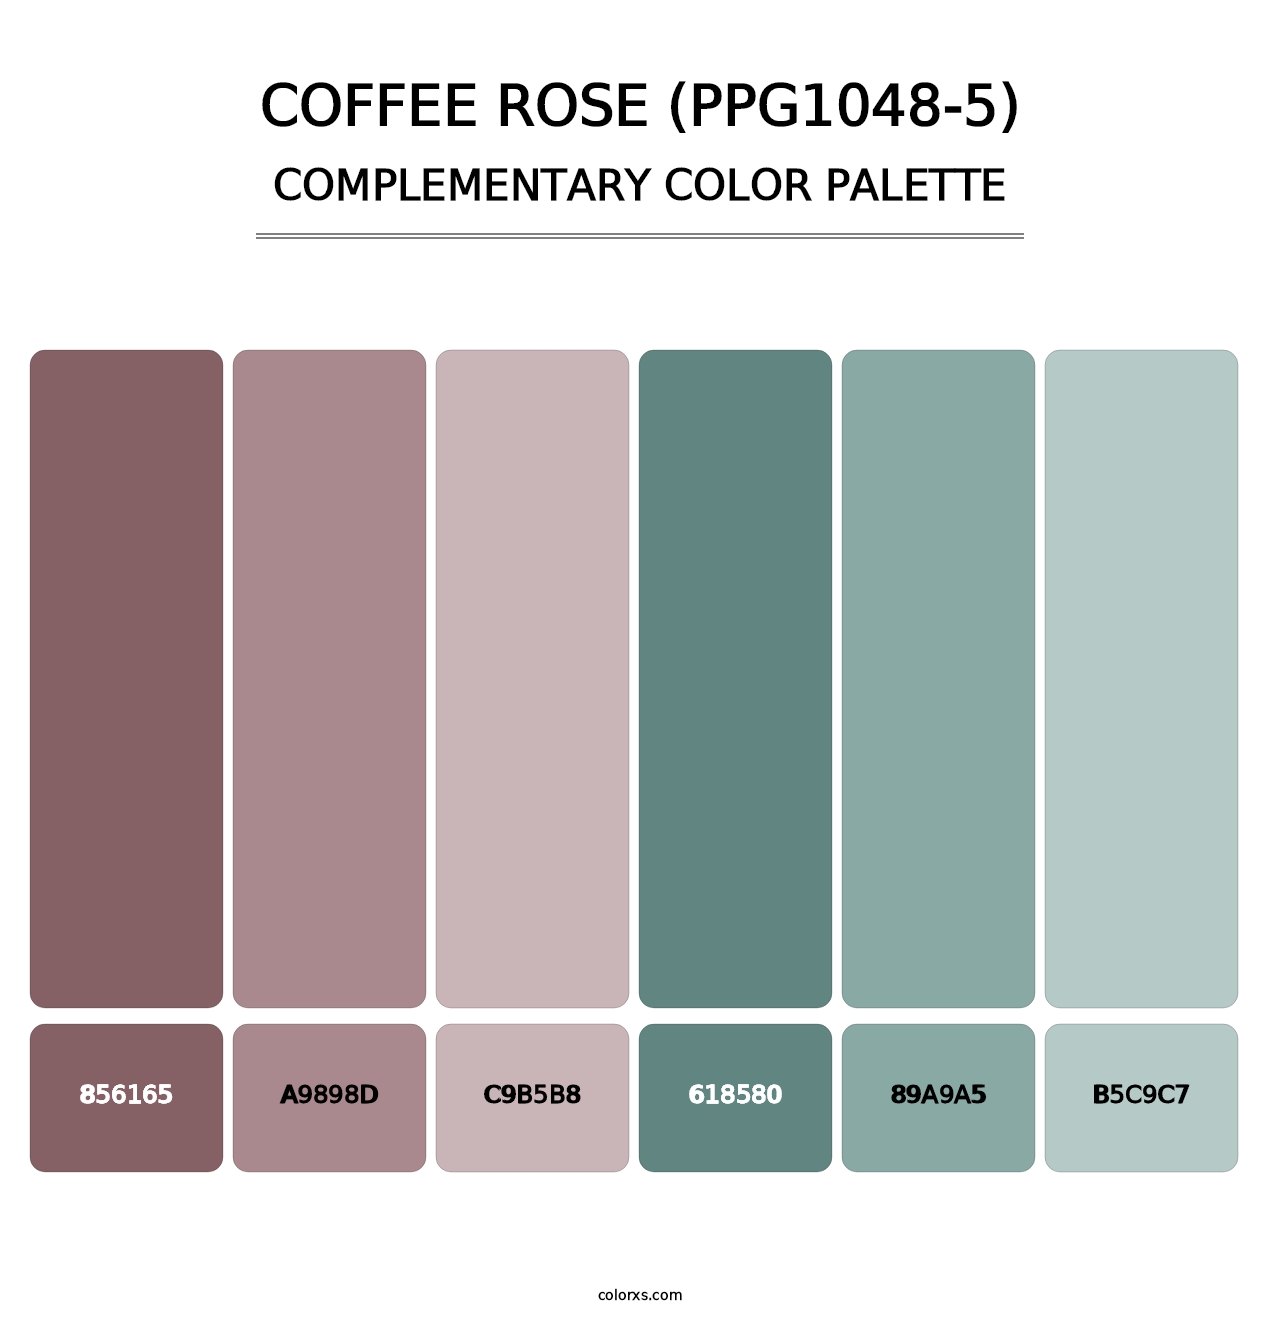 Coffee Rose (PPG1048-5) - Complementary Color Palette